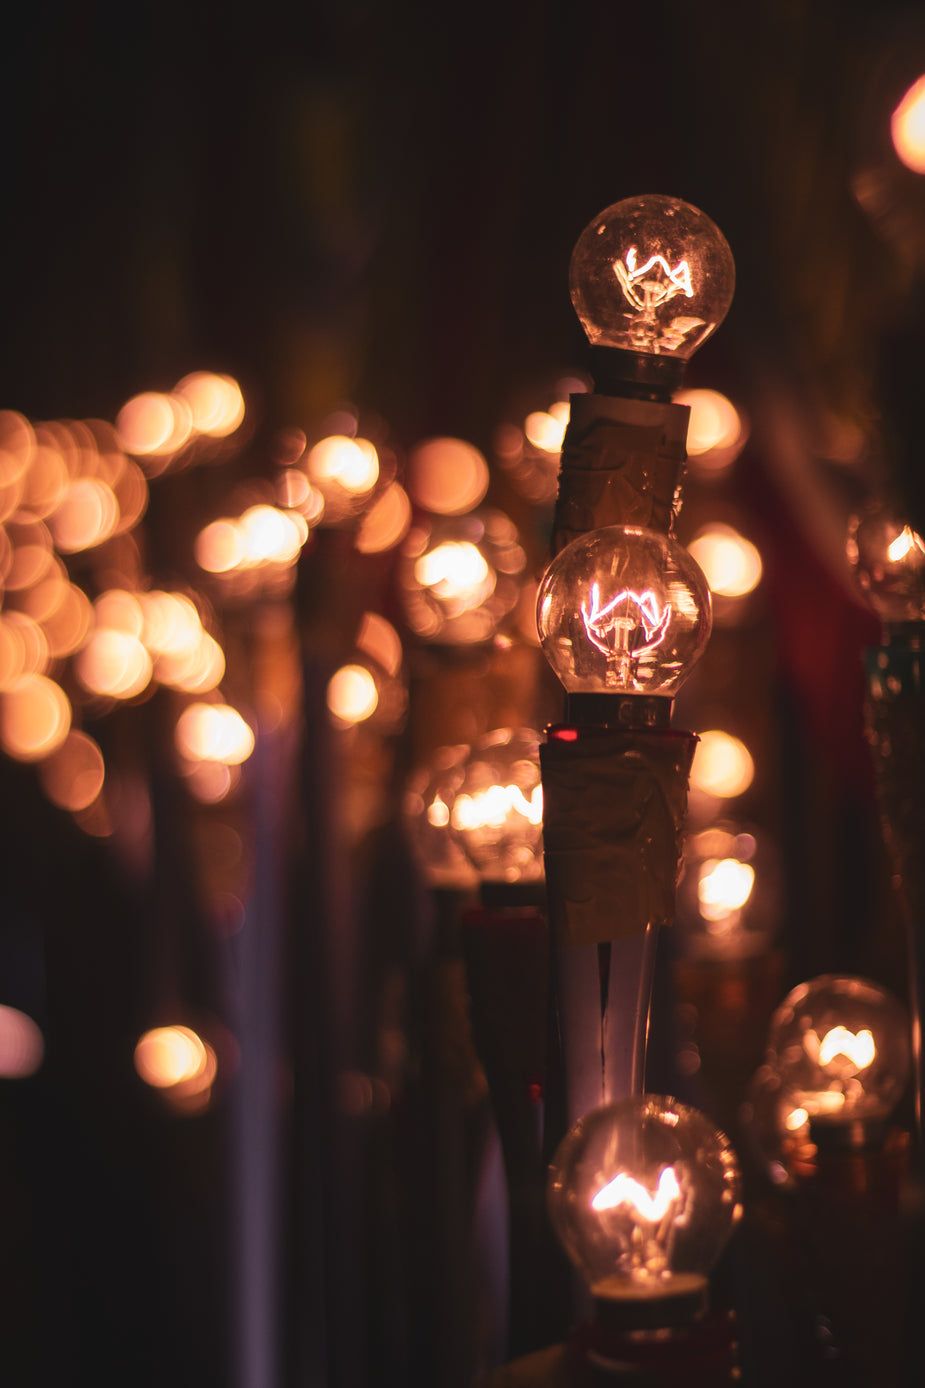 Browse Free HD Image of Edison Bulbs And Blurred Lights